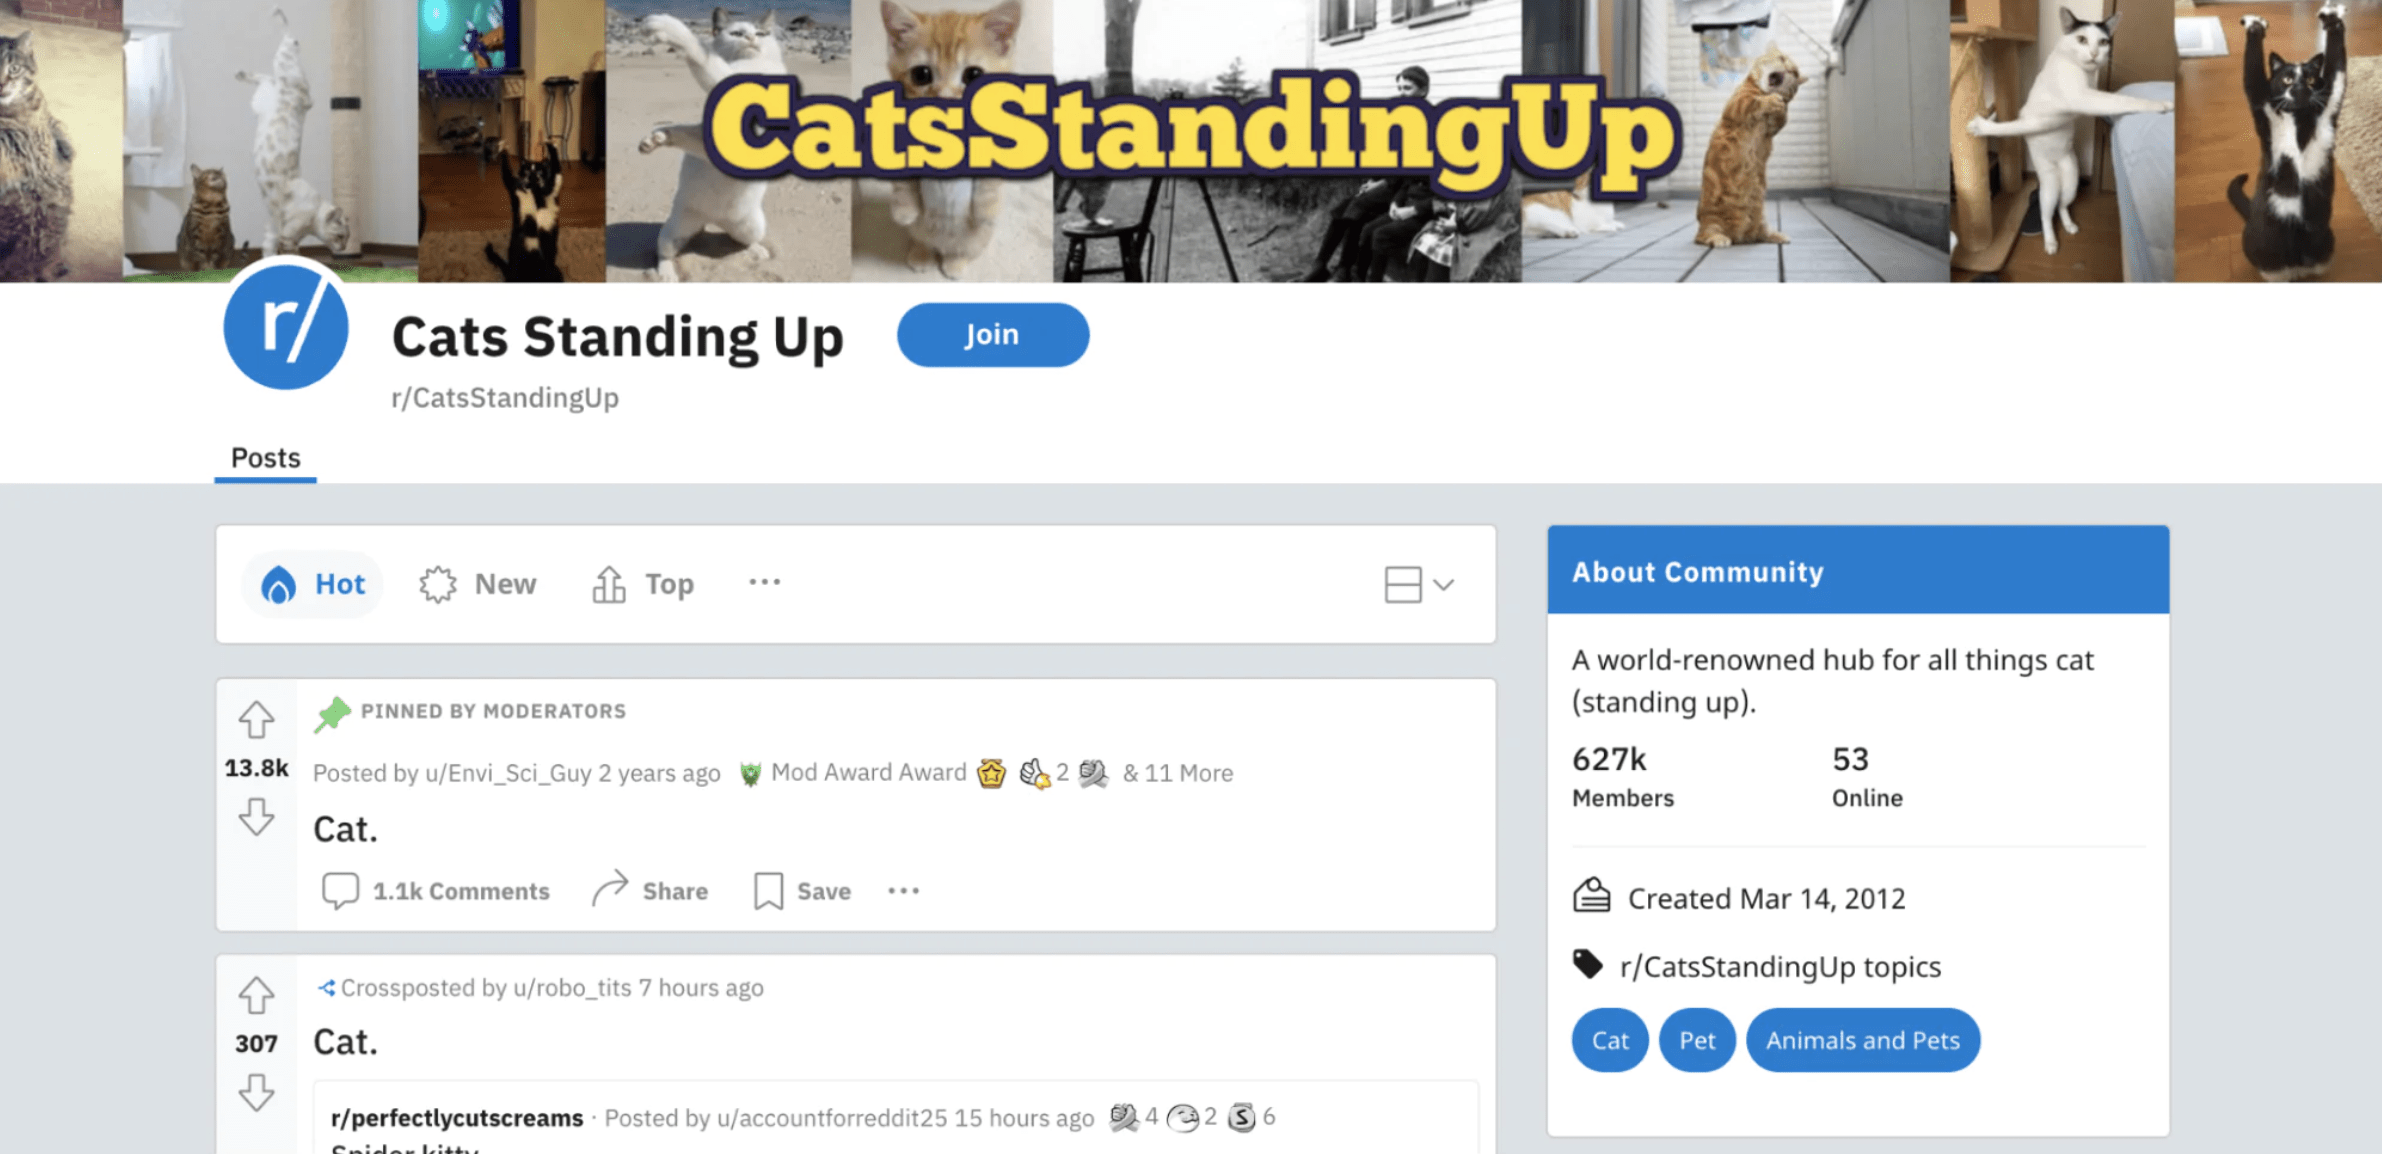 Example of a subreddit called Cats Standing Up on Reddit